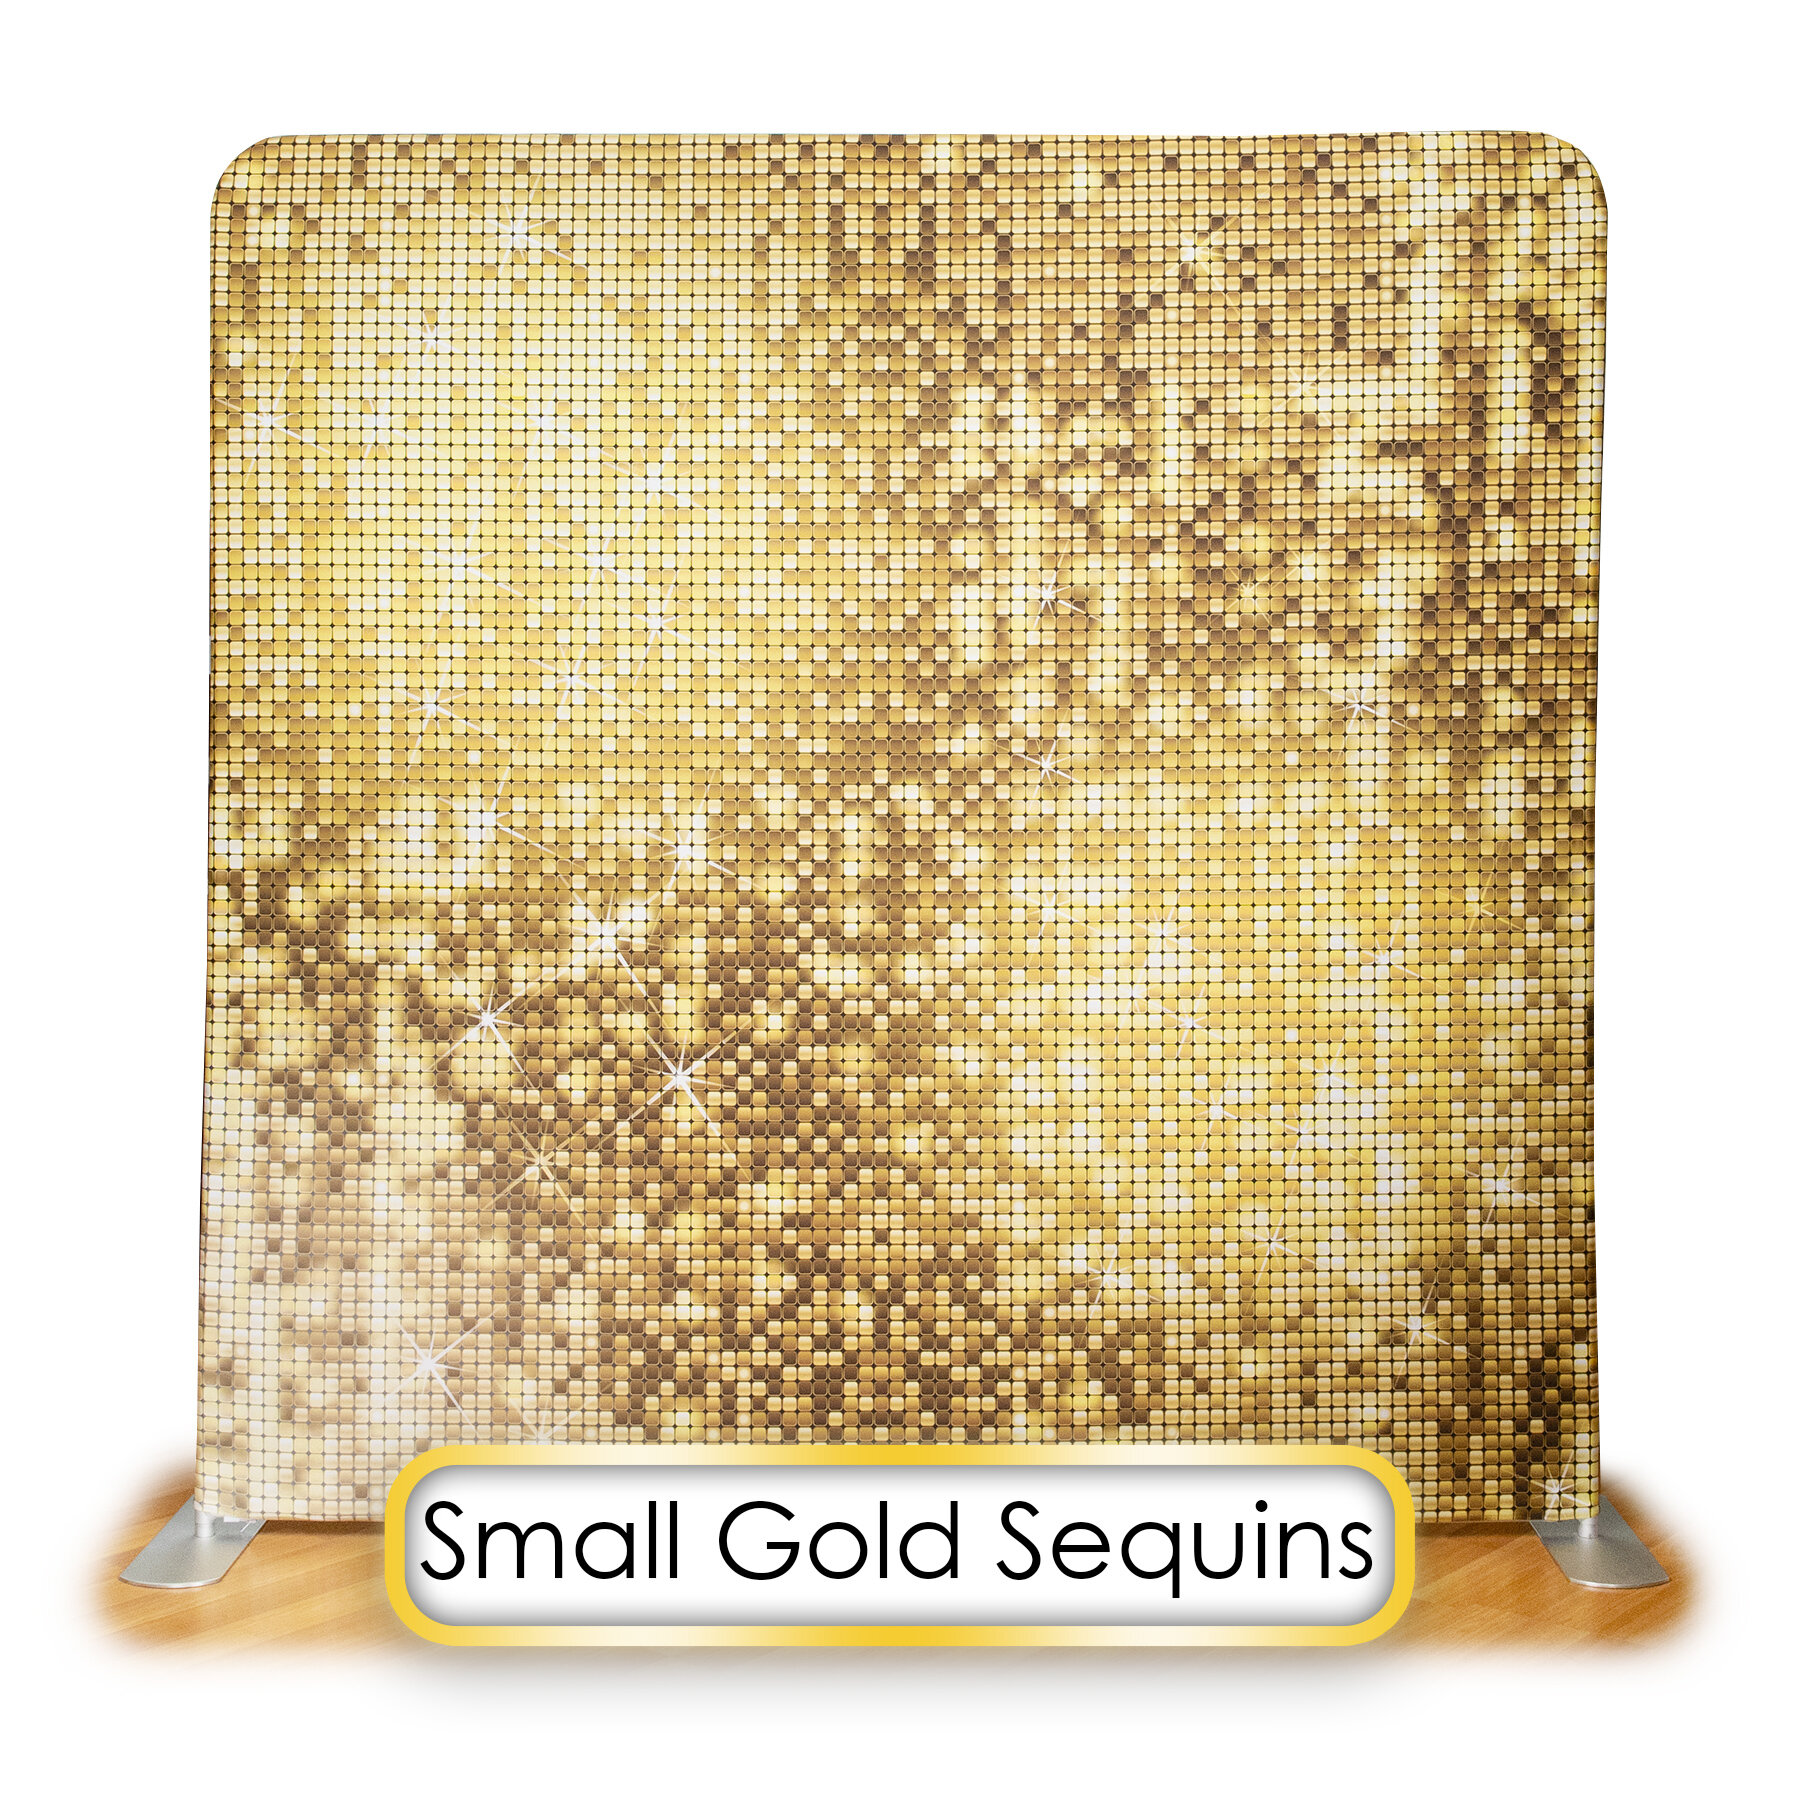 Small Gold Sequins.jpg